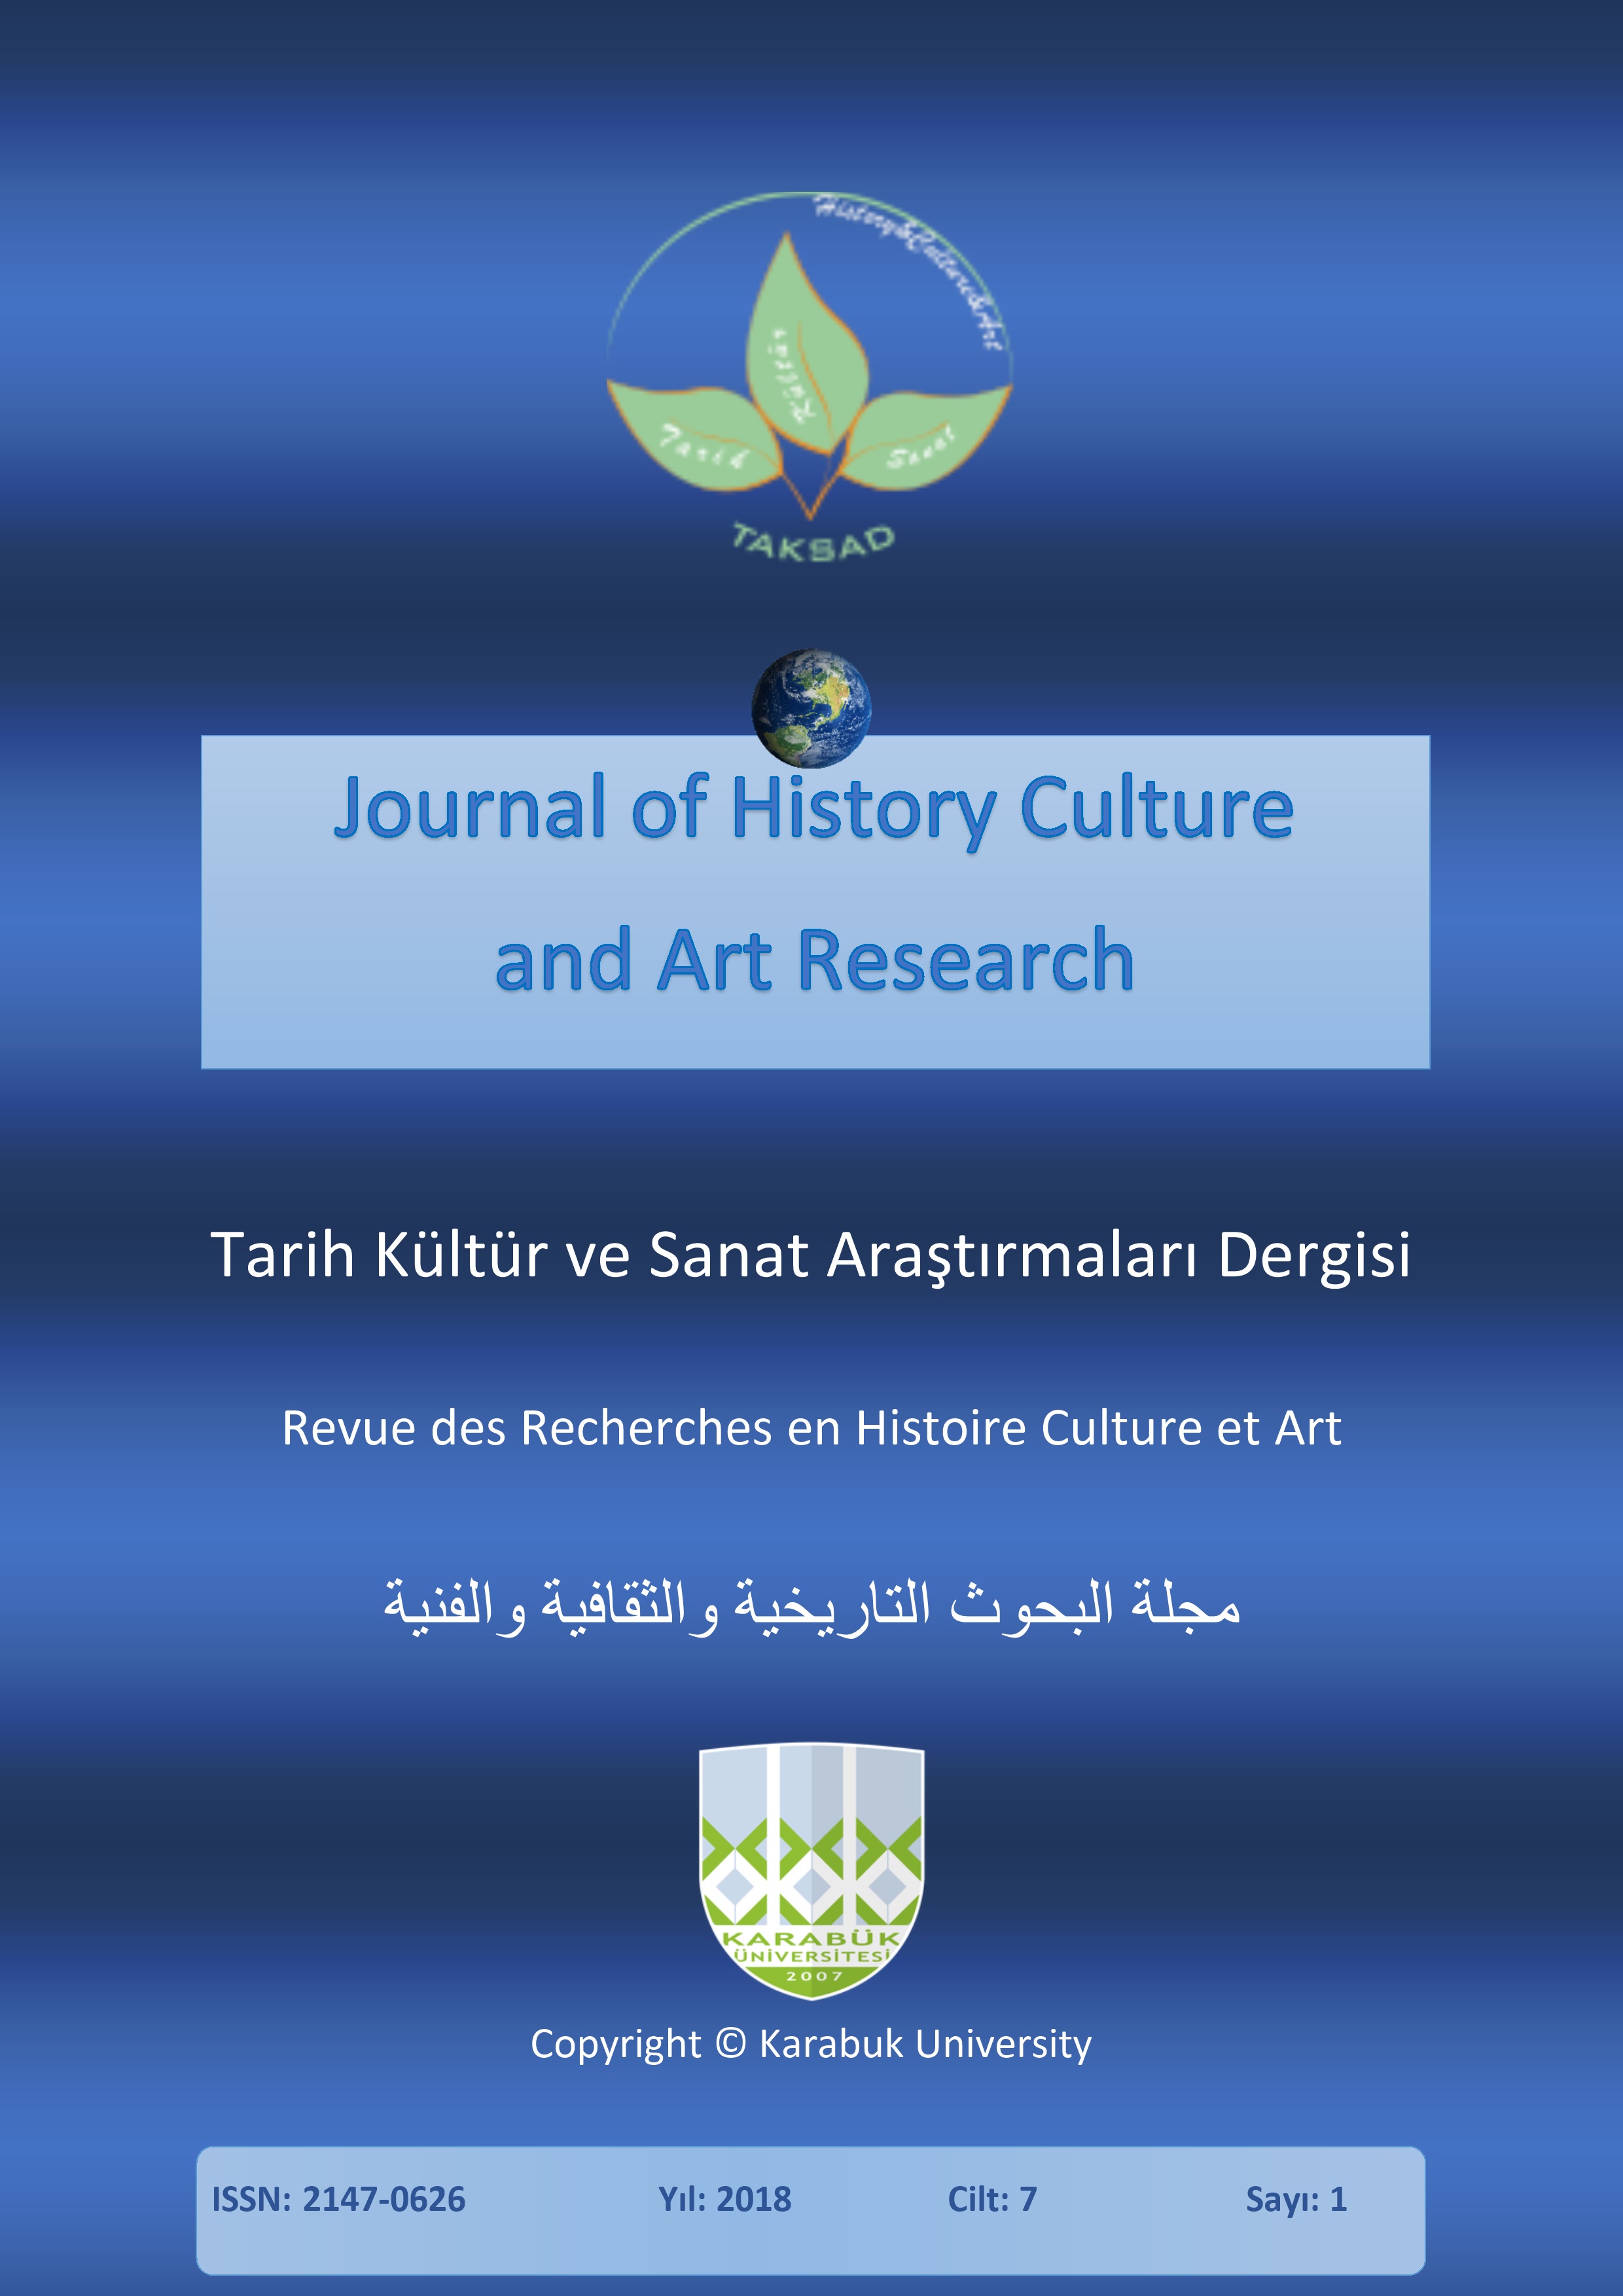 					View Vol. 7 No. 1 (2018): Journal of History Culture and Art Research 7(1)
				